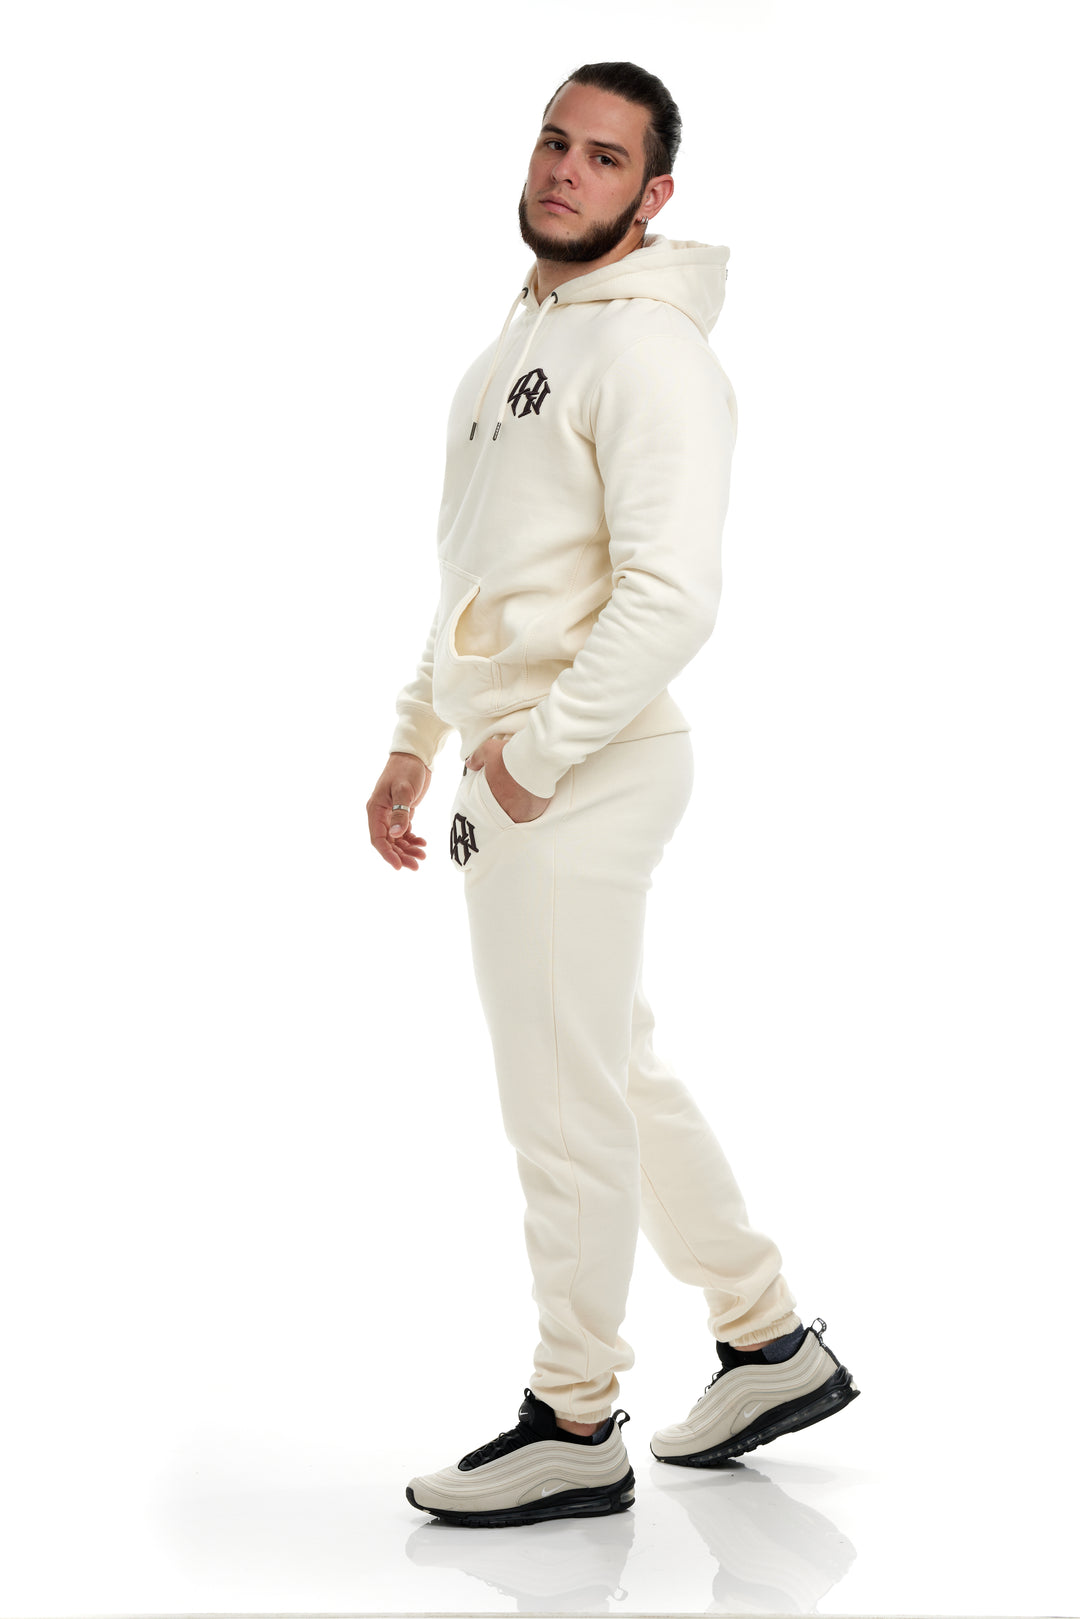 Premium 400gsm Heavyweight Cream Colored Sweatpants modeled by a young man